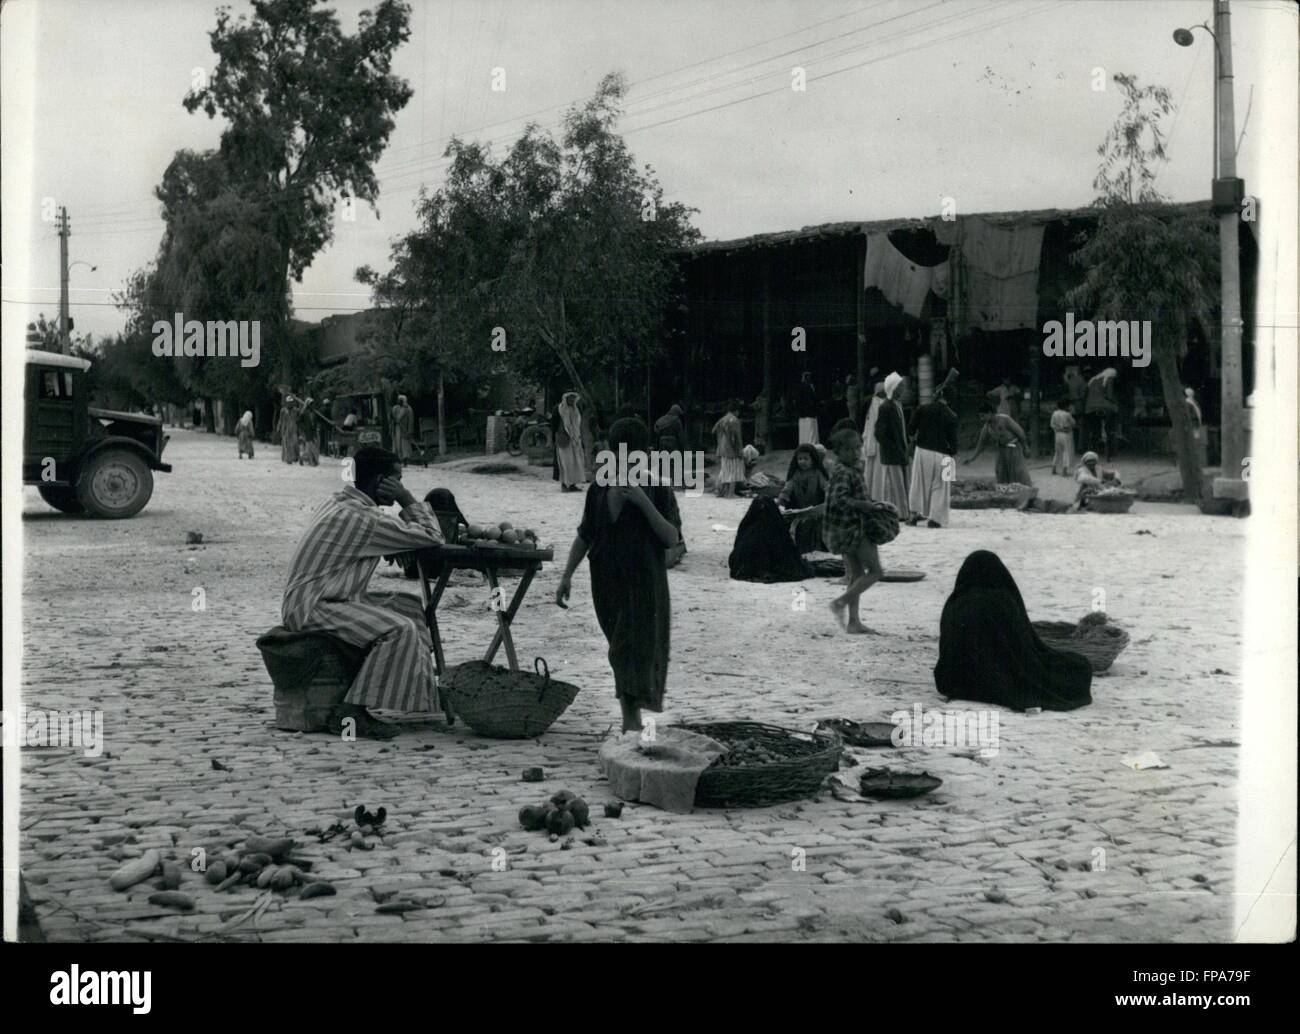 1979 - Scenes of Bagdad, Iraq: Qiet and peaceful picture awaits the visitor in Bagdad, Iraq the people living their every day life and are not disturbed by the events of the world Photo shows Old building of Selman Pak suburb of Bagdad © Keystone Pictures USA/ZUMAPRESS.com/Alamy Live News Stock Photo